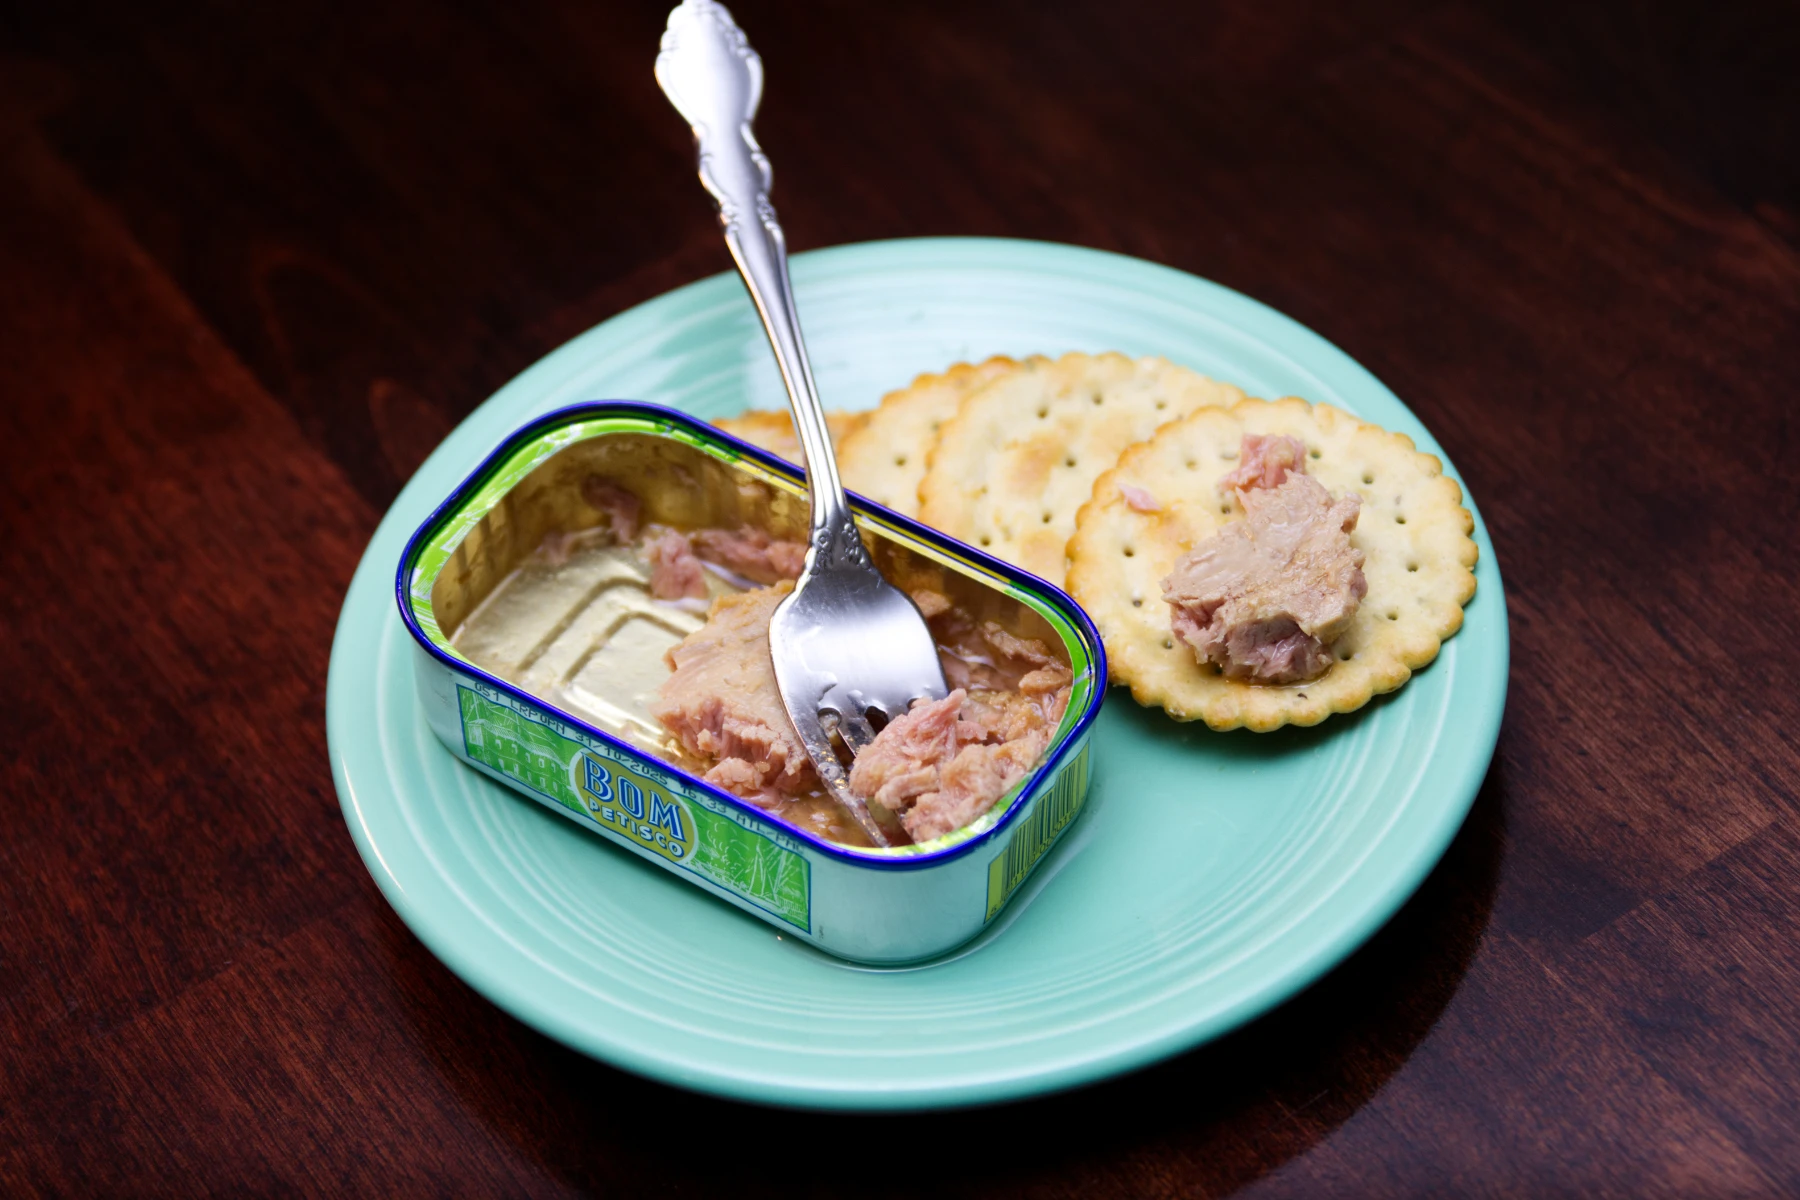 Half empty tin of tuna and a couple of crackers left on a plate. One cracker has a piece of tuna on it.